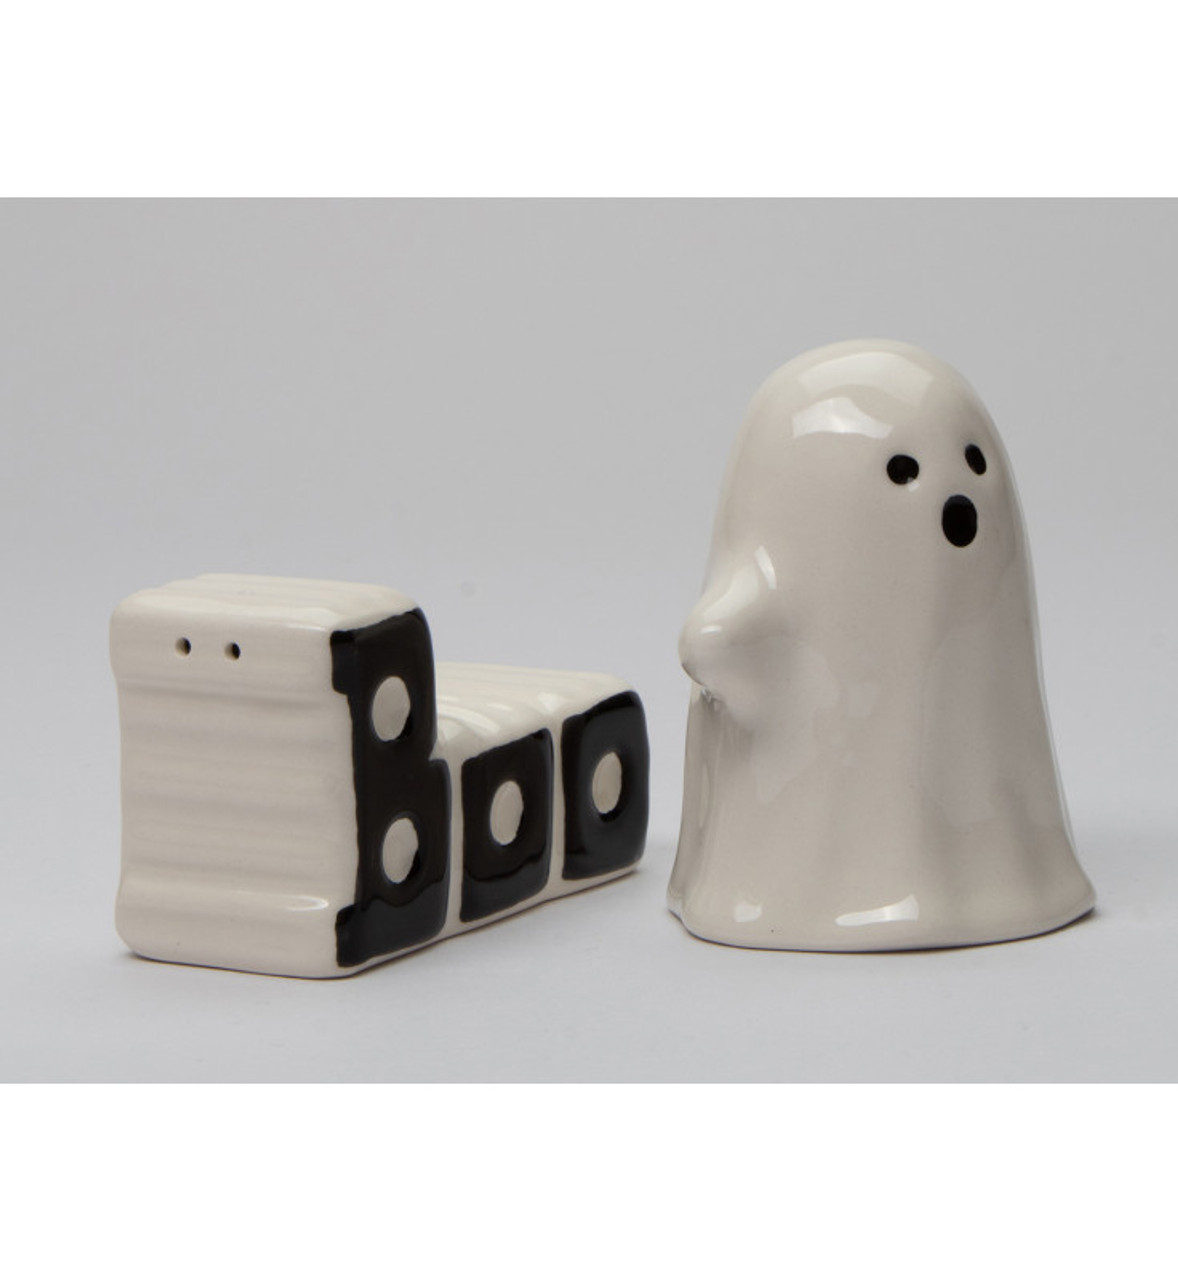 https://cdn11.bigcommerce.com/s-oo0gdojvjo/images/stencil/1280x1280/products/80718/148960/21069-halloween-ghost-and-boo-porcelain-salt-and-pepper-shakers-set-of-4-2__08324.1701680602.jpg?c=2&imbypass=on